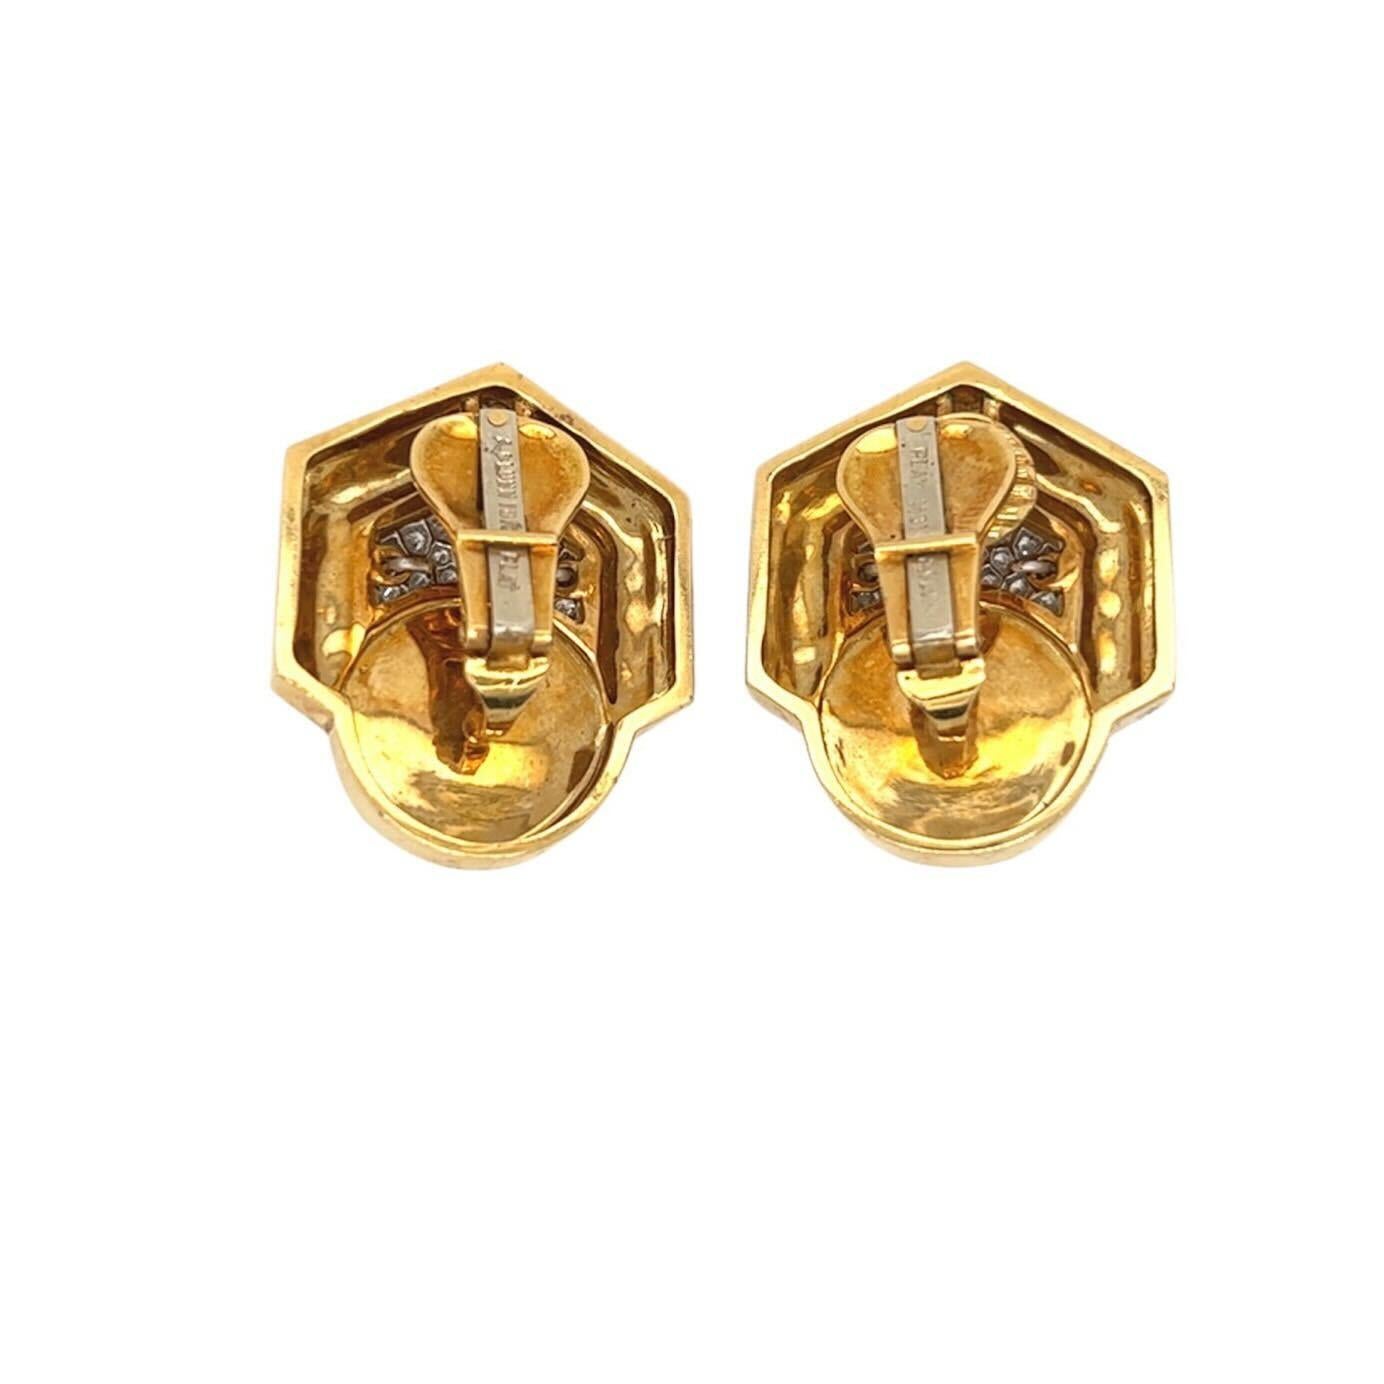 Round Cut Andrew Clunn Yellow Gold, Mabe Pearl, Diamond and Enamel Earrings